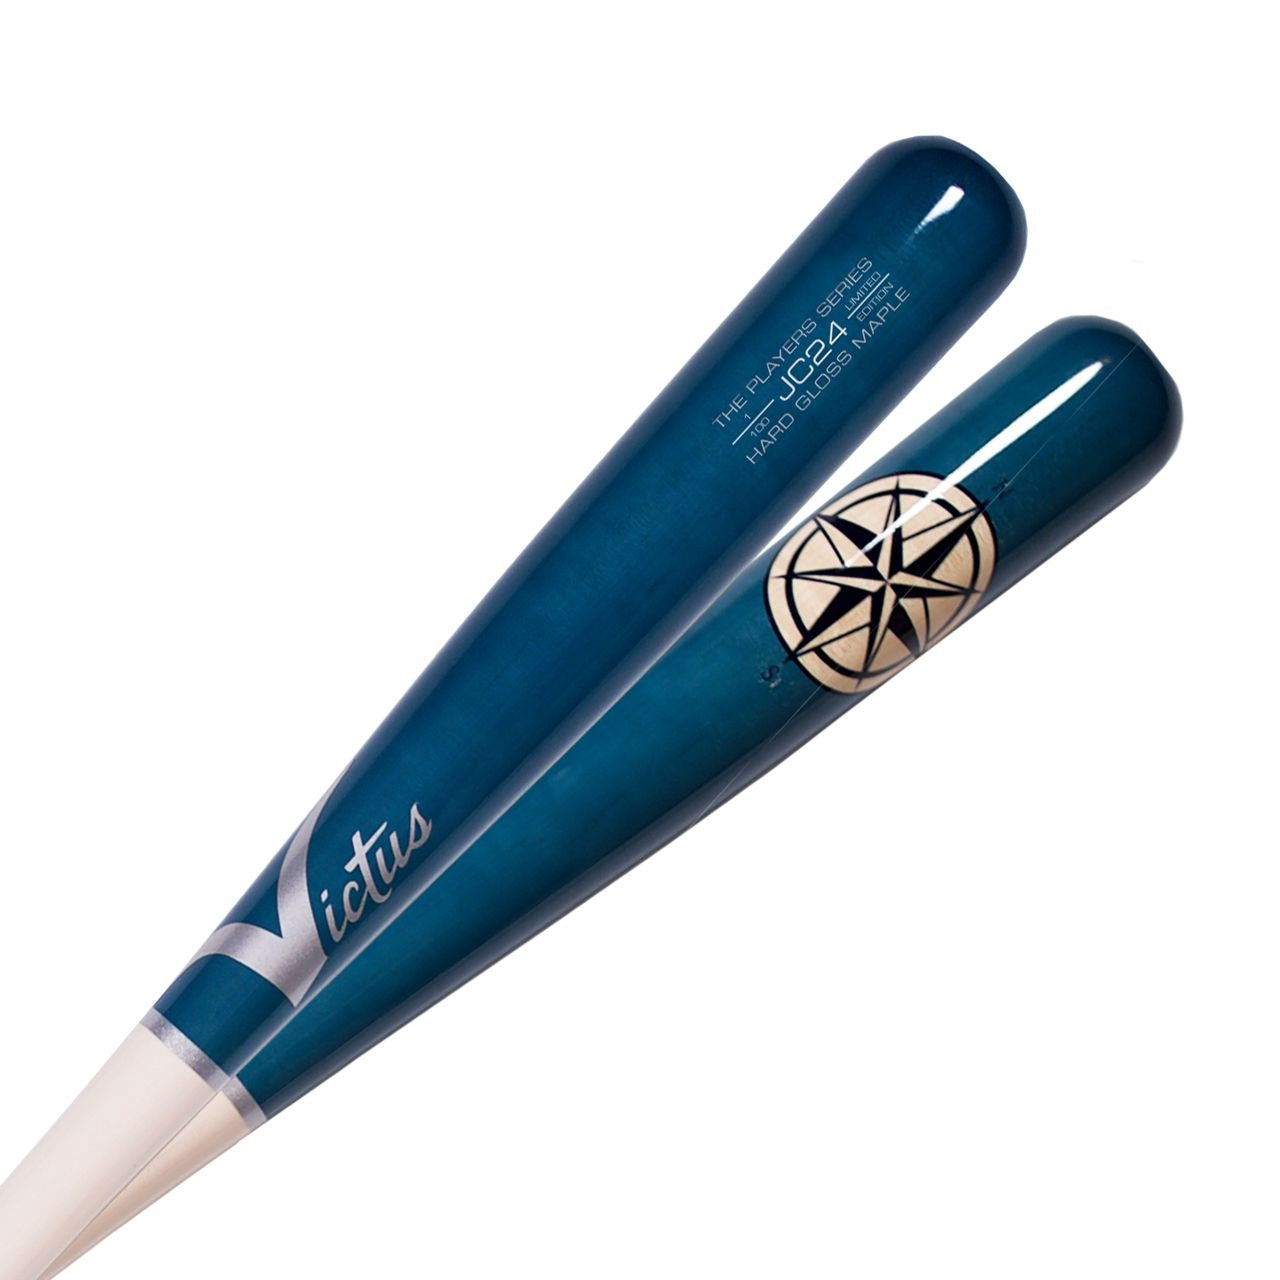 Victus "The Compass" JC24 Pro Reserve Limited Edition